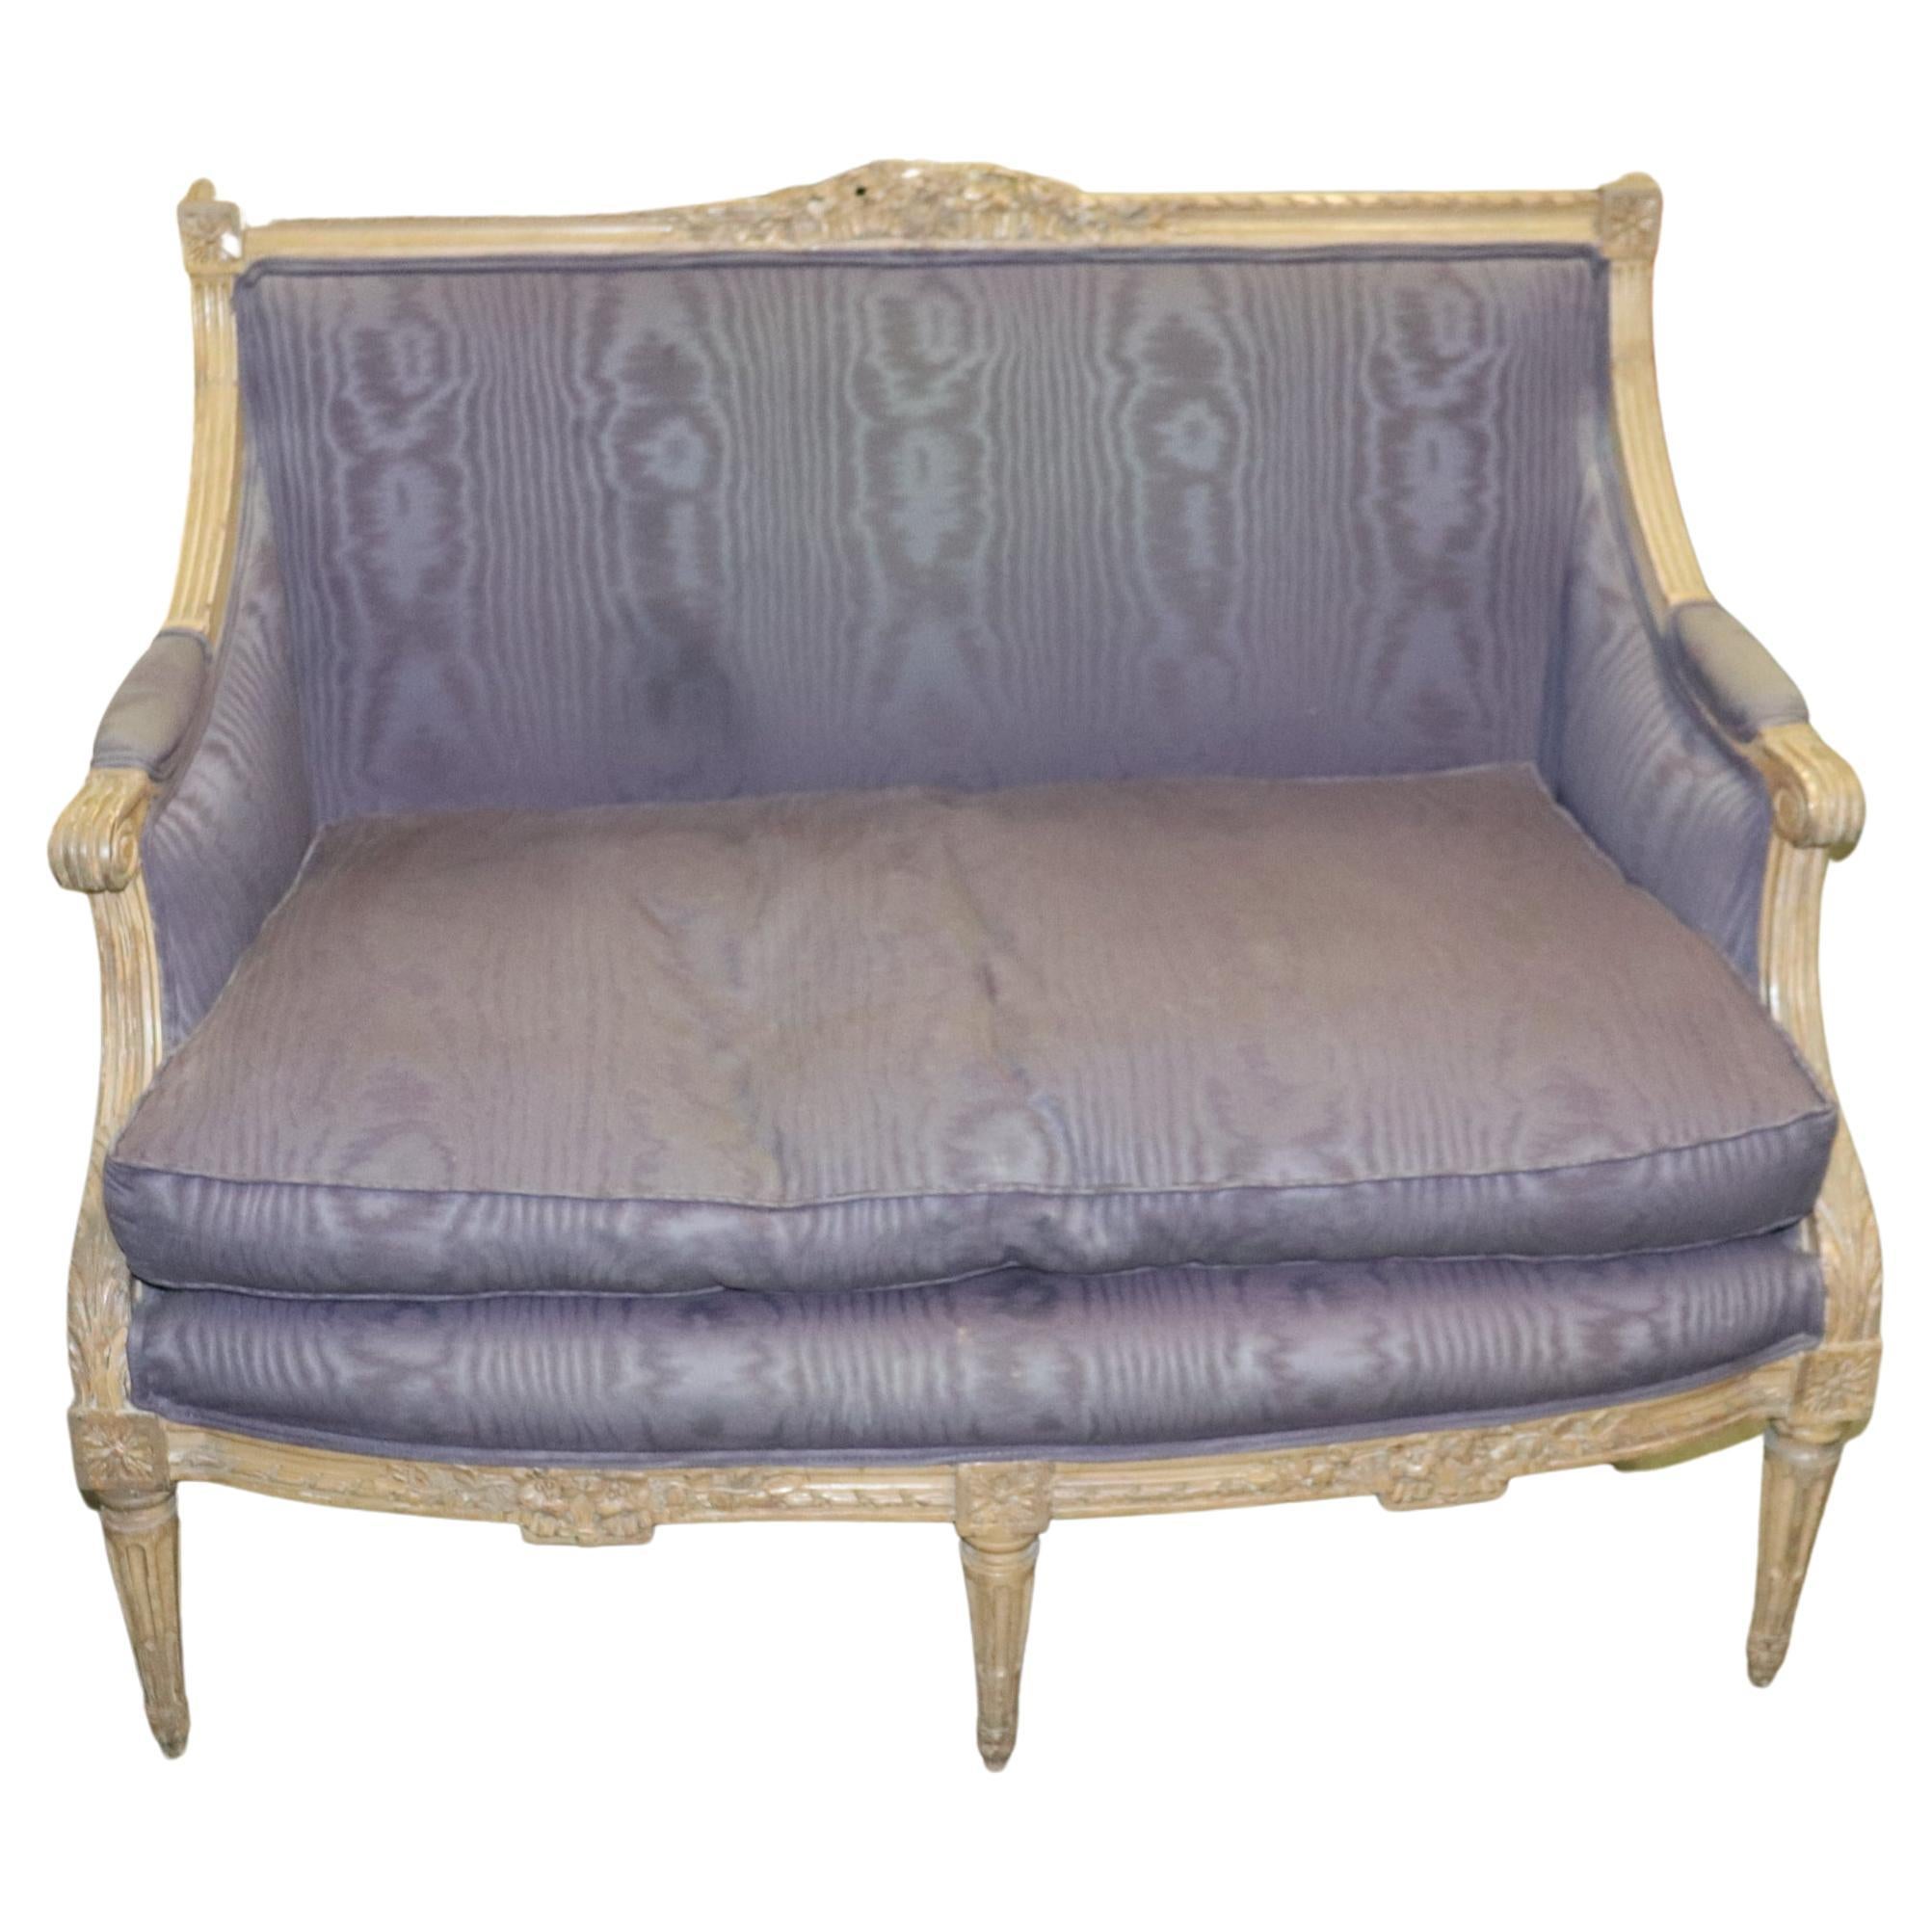 Fine Carved Painted French Louis XV Marquis Canape Settee, circa 1920